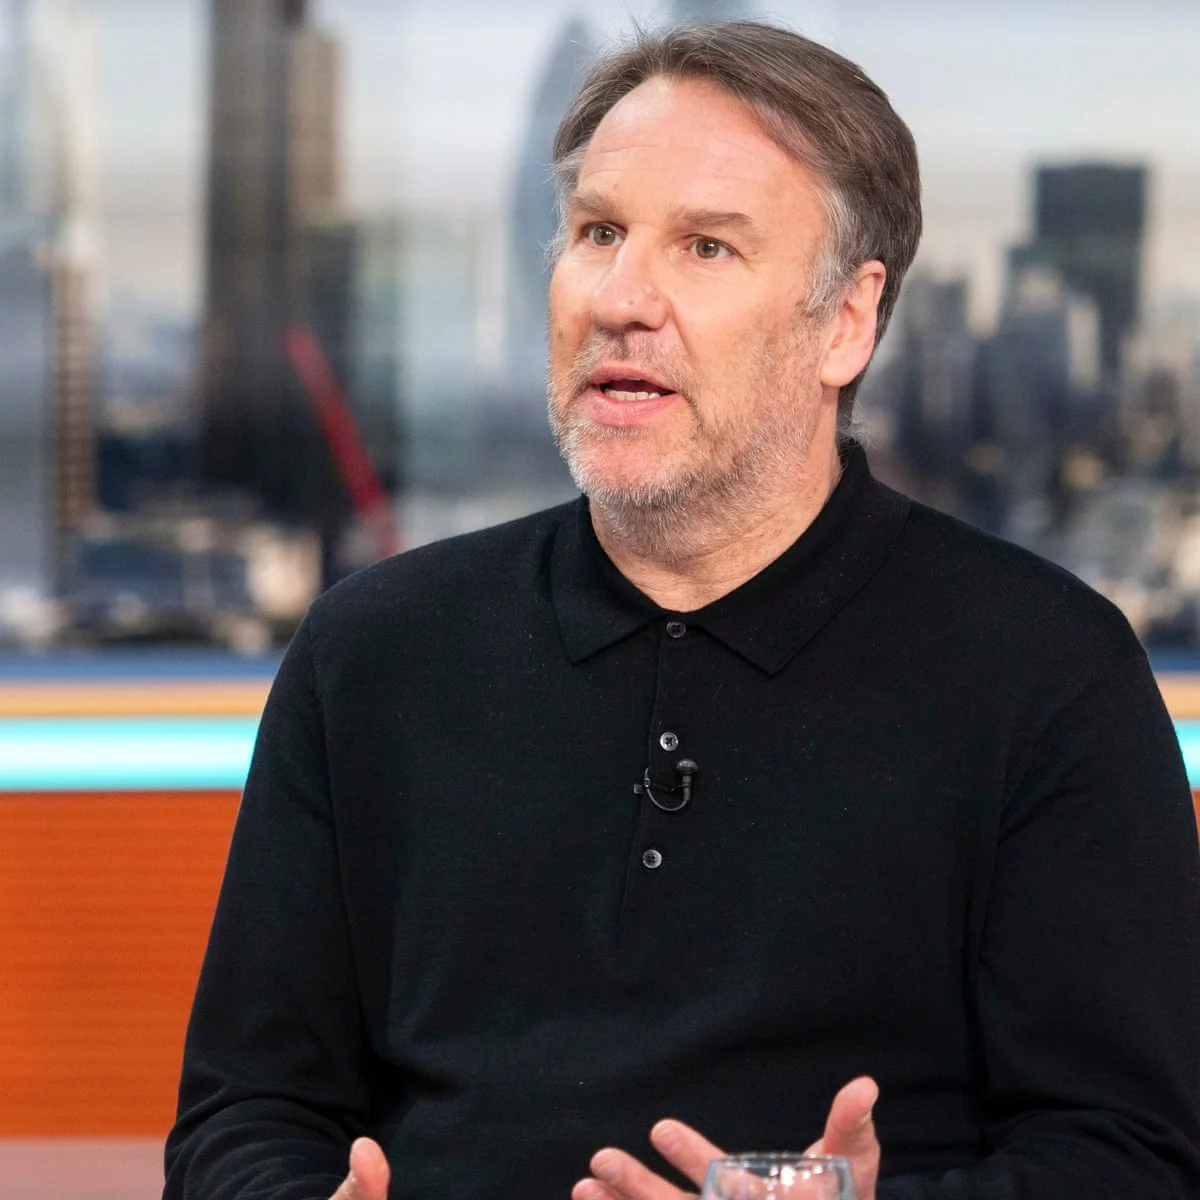 EPL: Paul Merson predicts Man City vs Arsenal, Liverpool, Chelsea and more